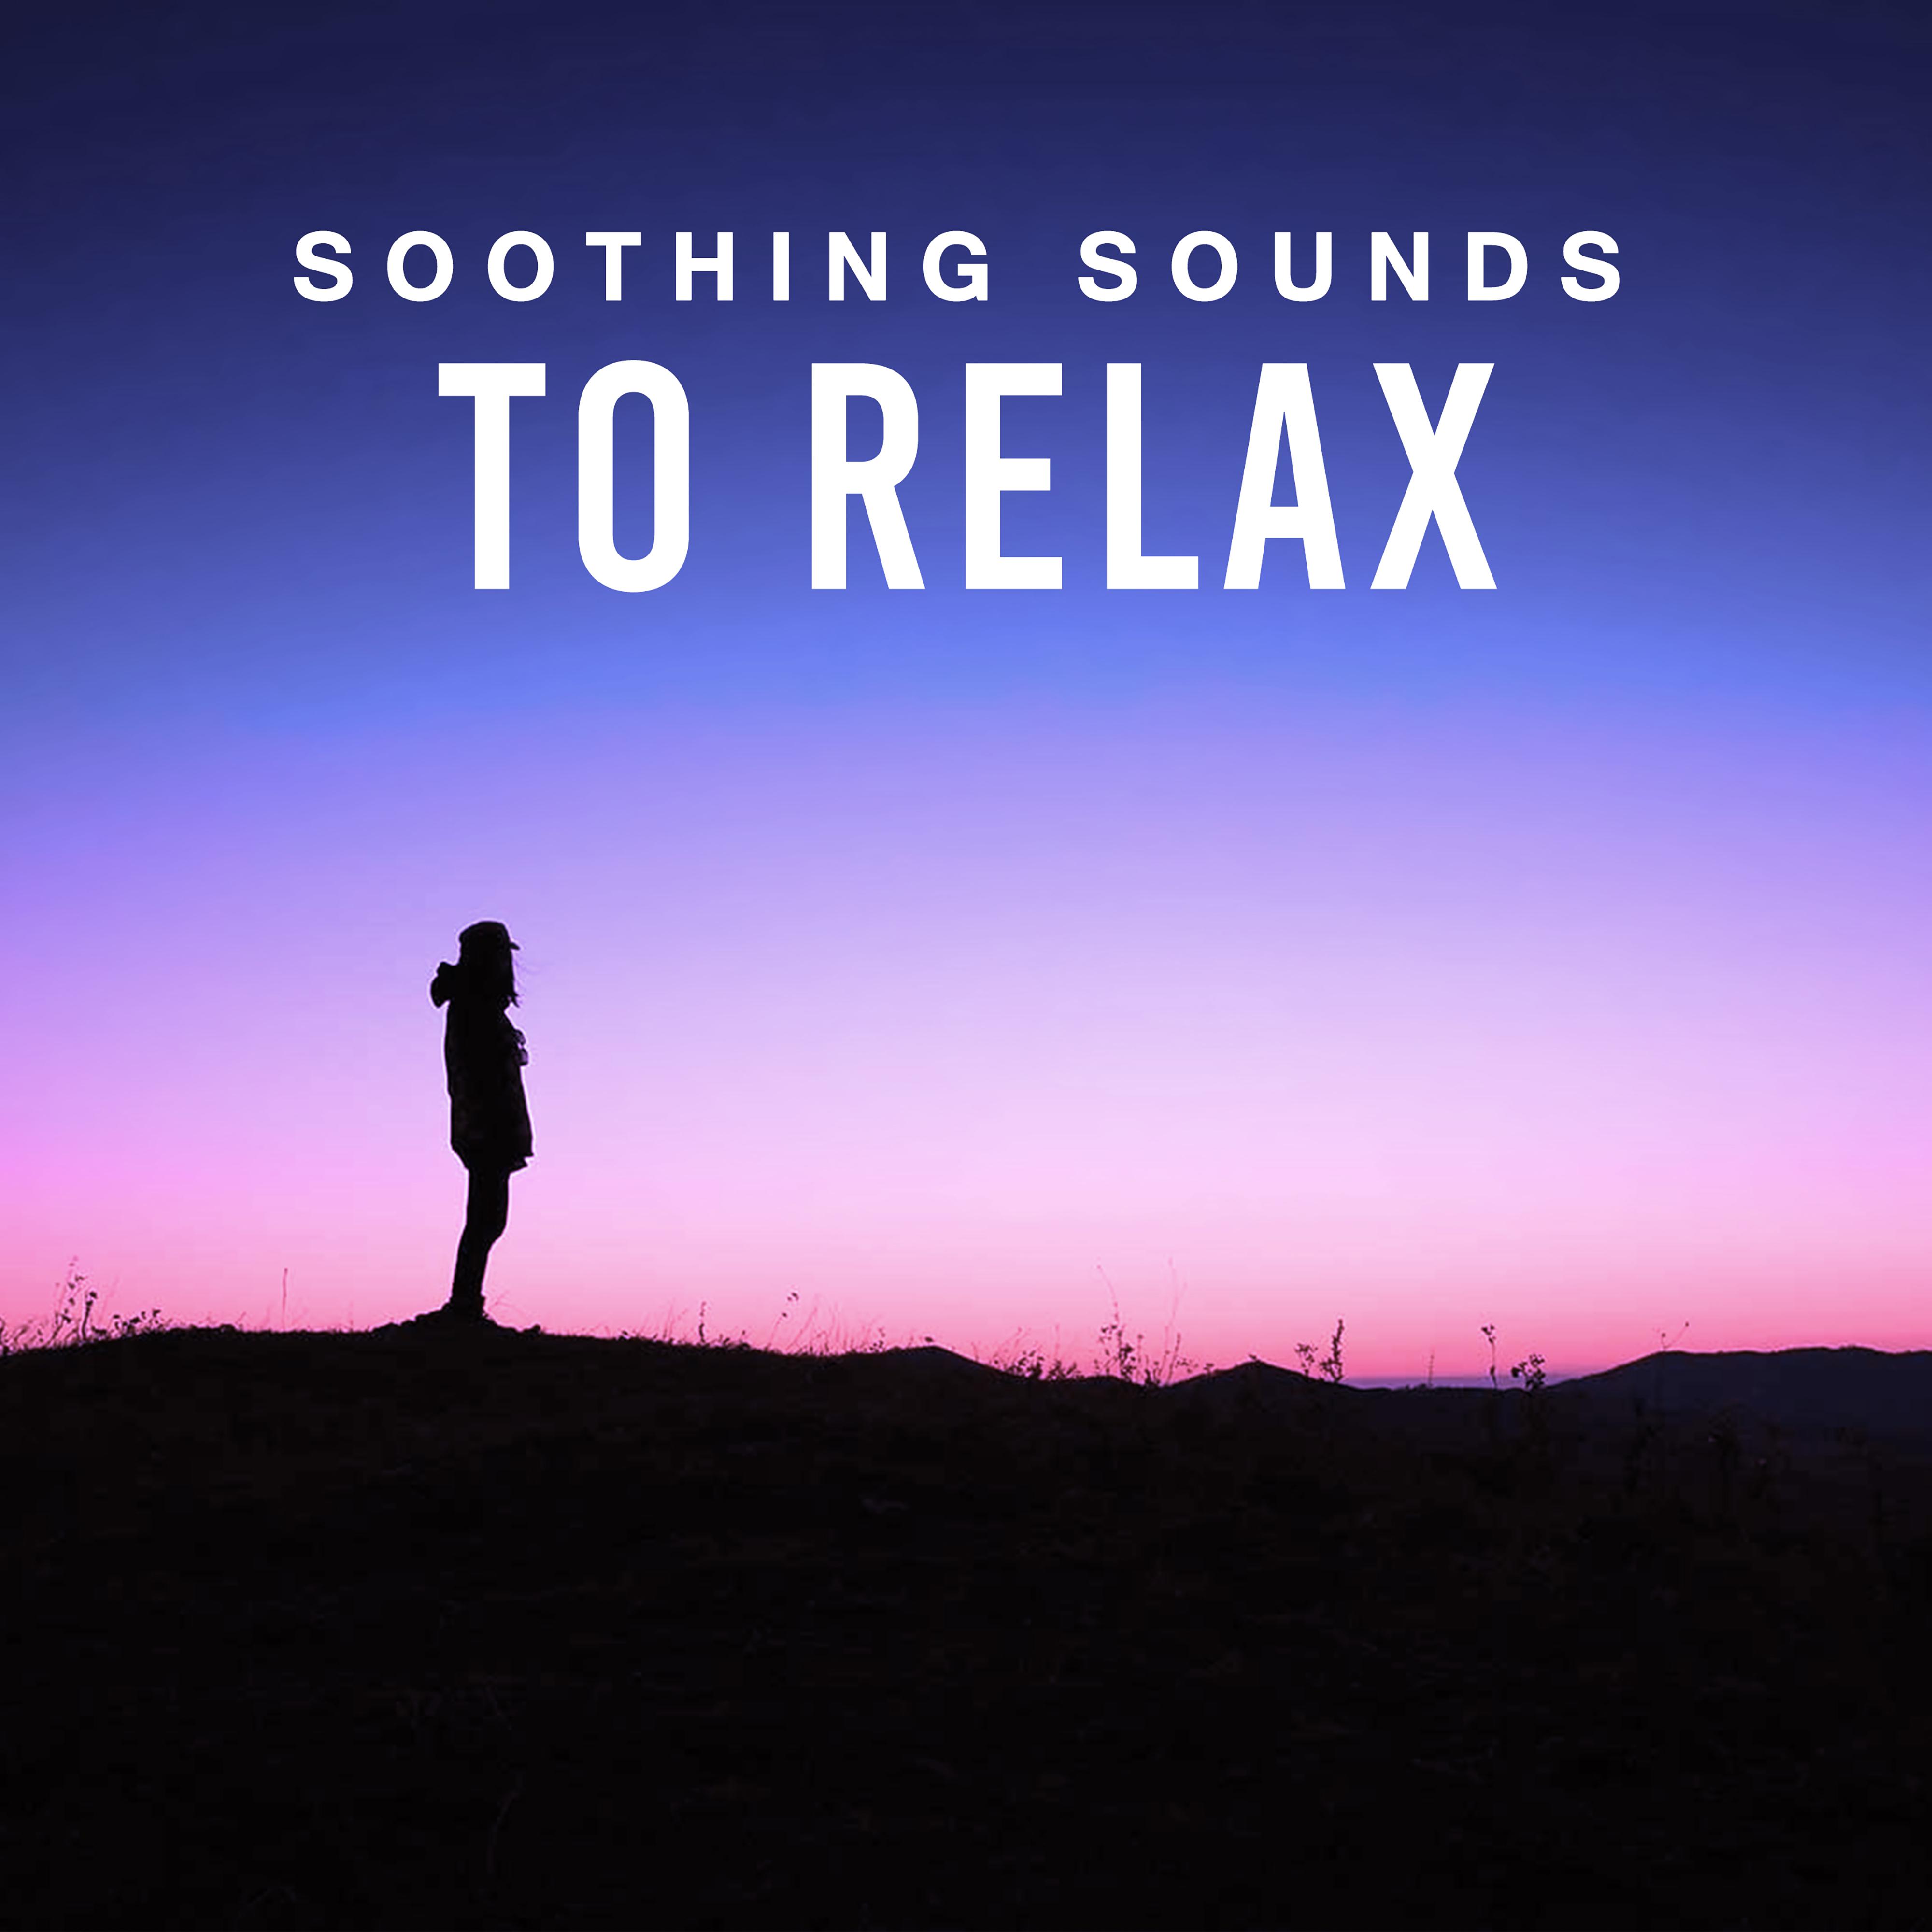 Soothing Sounds to Relax  Chilled Sounds to Calm Down, Inner Silence, Mind Calmness